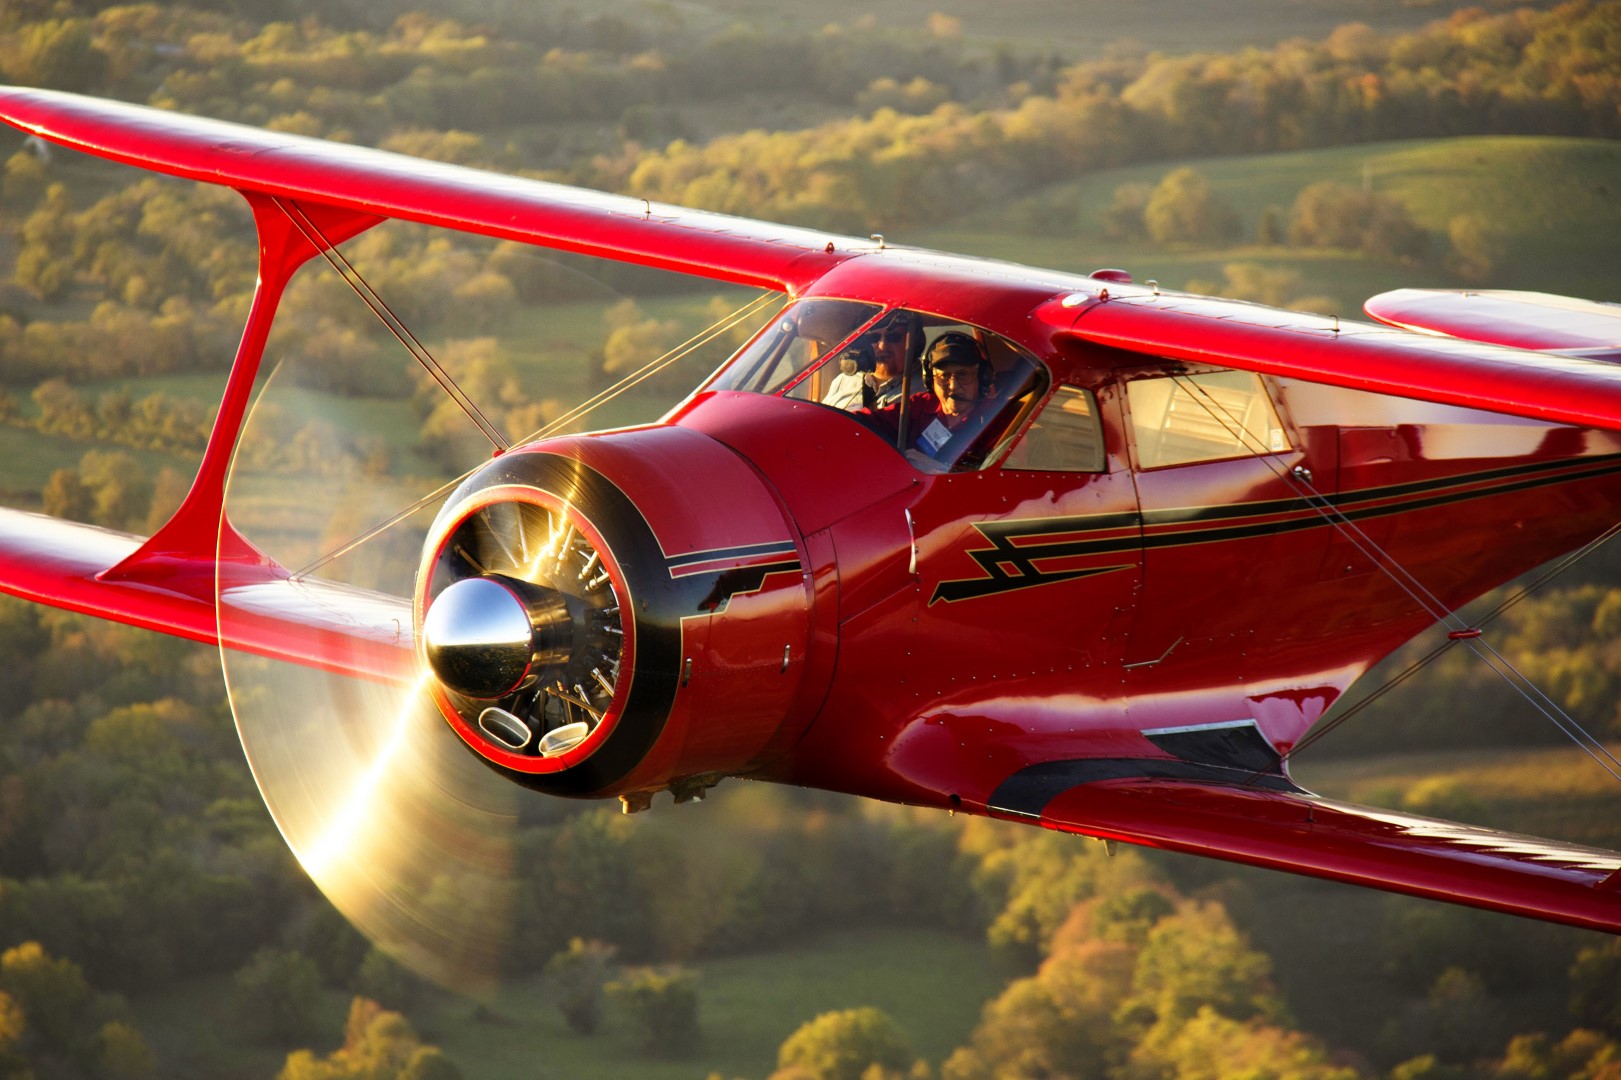 First flown in 1932, the Beechcraft Model 17 “Staggerwing” was designed for the traveling business executive. The airplane had a retractable gear and boasted speeds of up to 212 mph. This timeless design is as beautiful today as ever. Photo by Thomas Hoff.